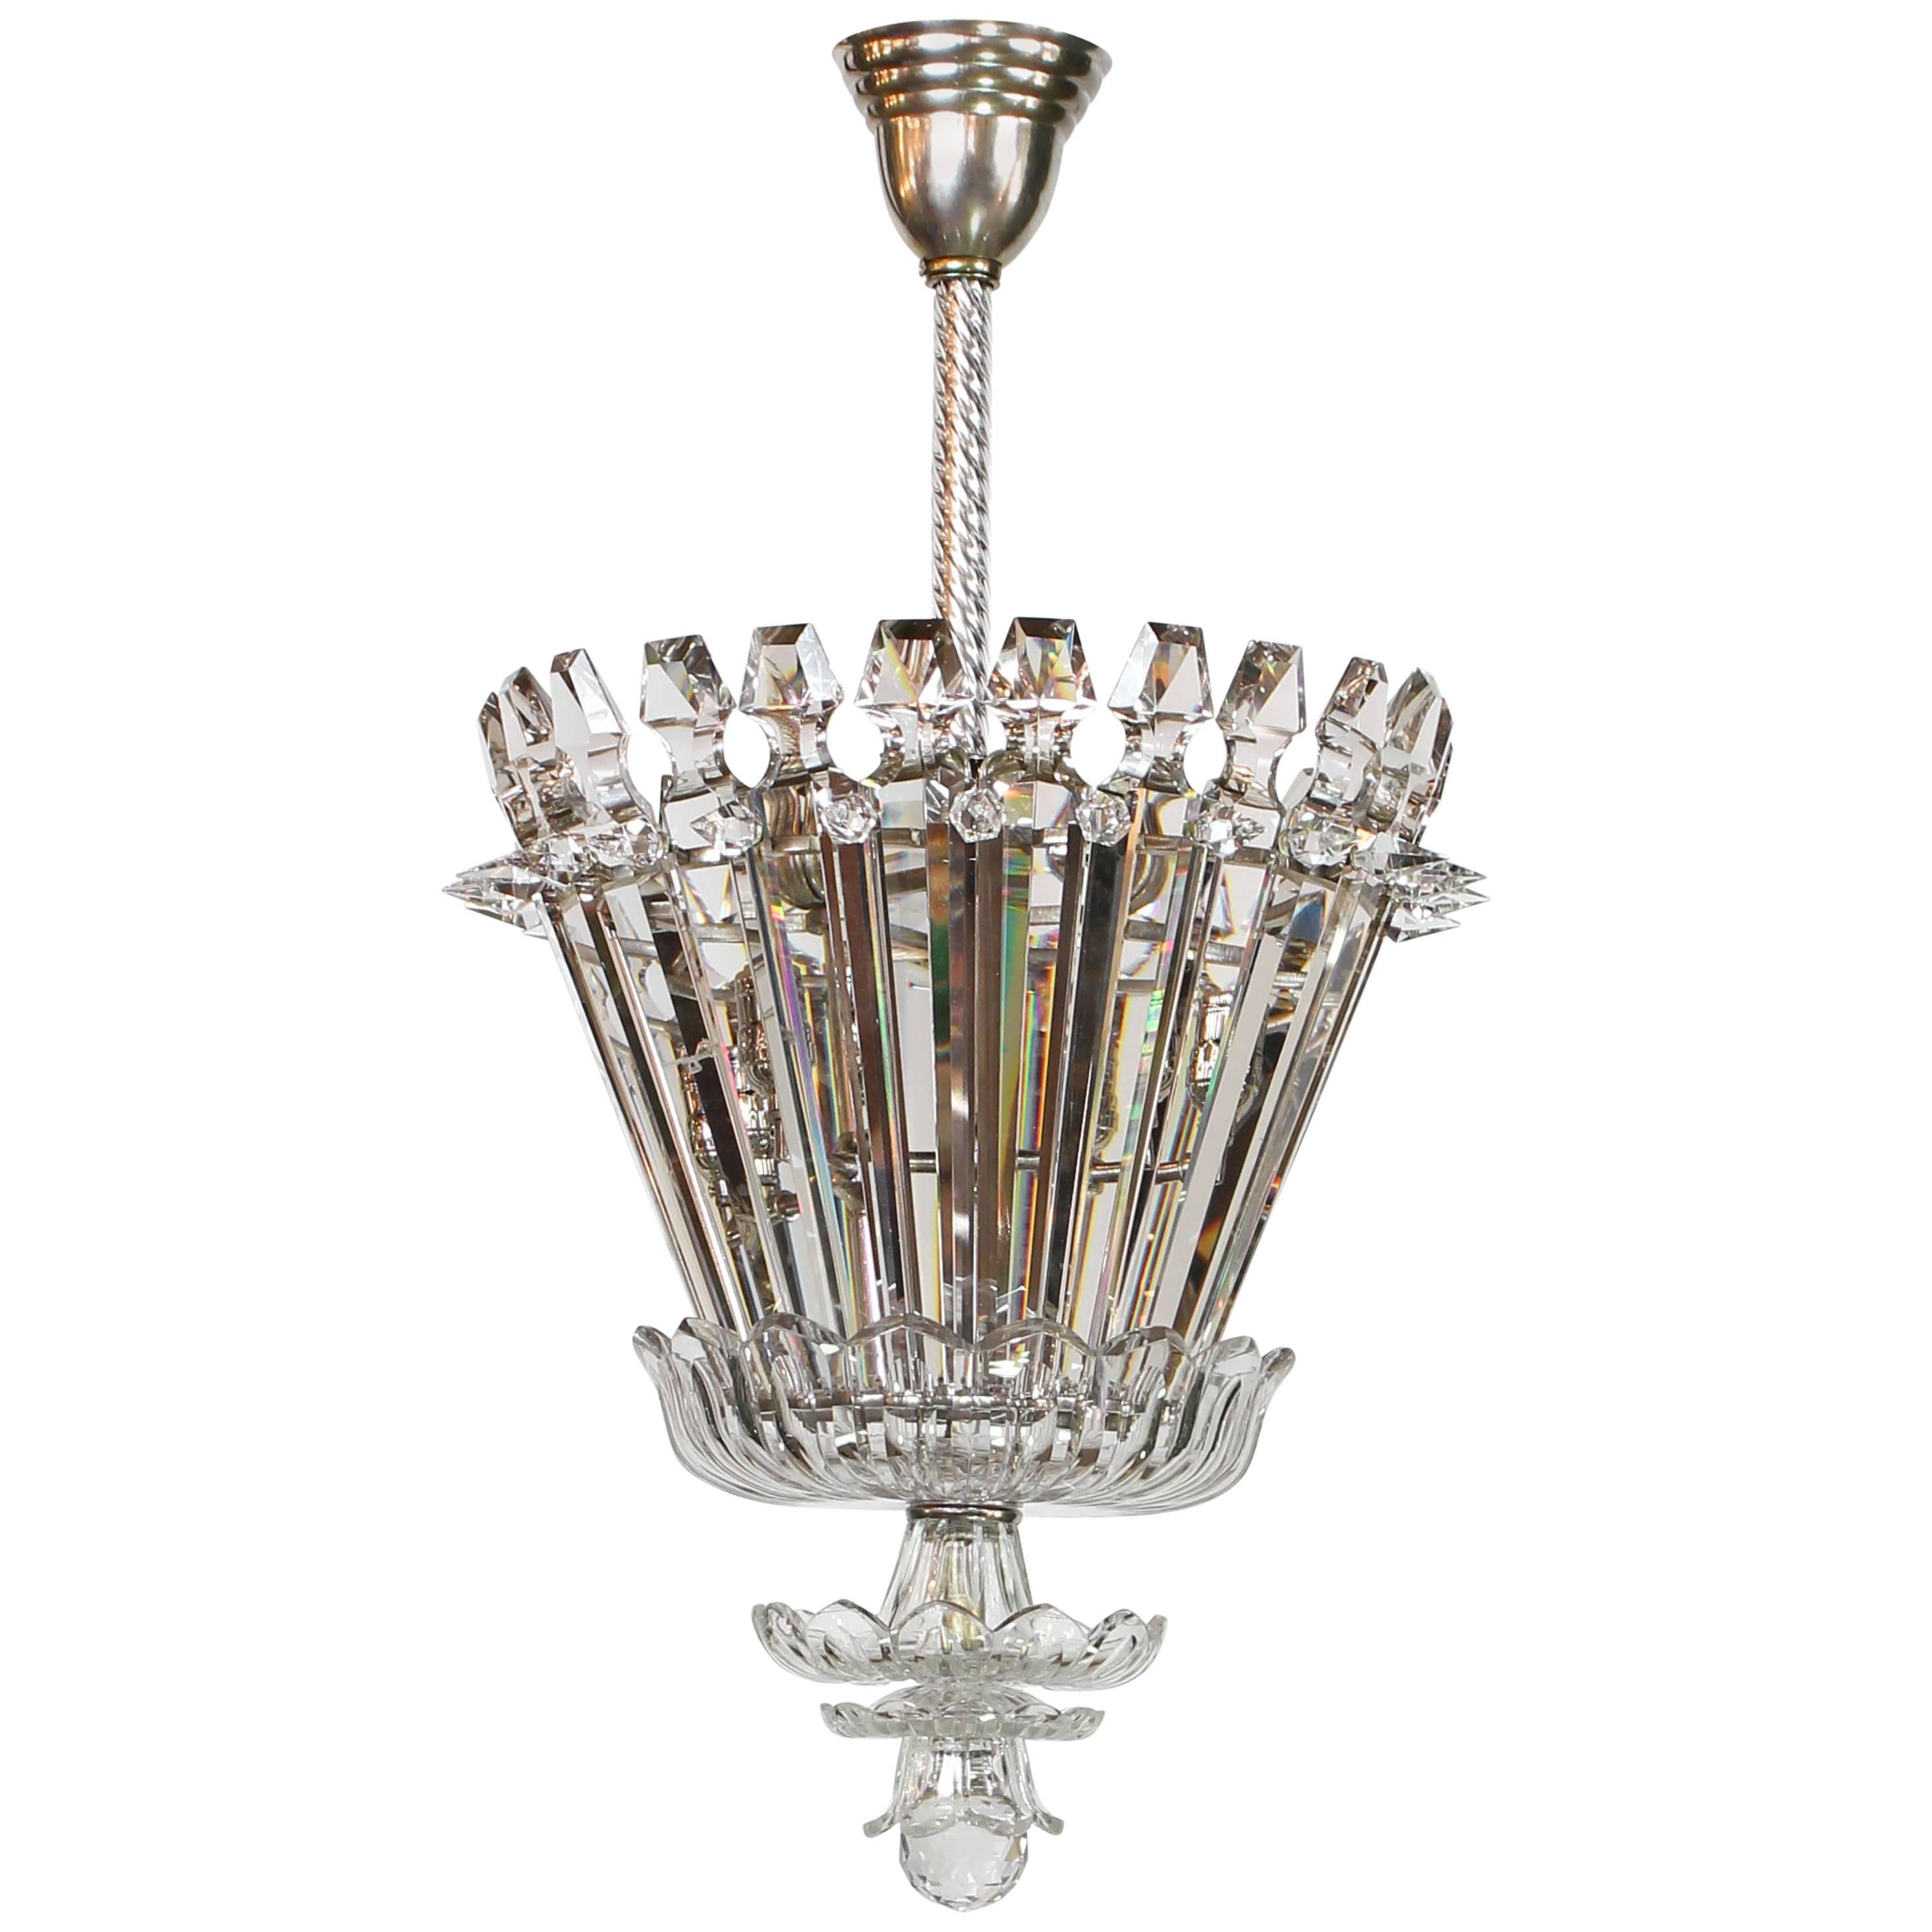 Striking Early Electric Crystal Pendant Fixture For Sale